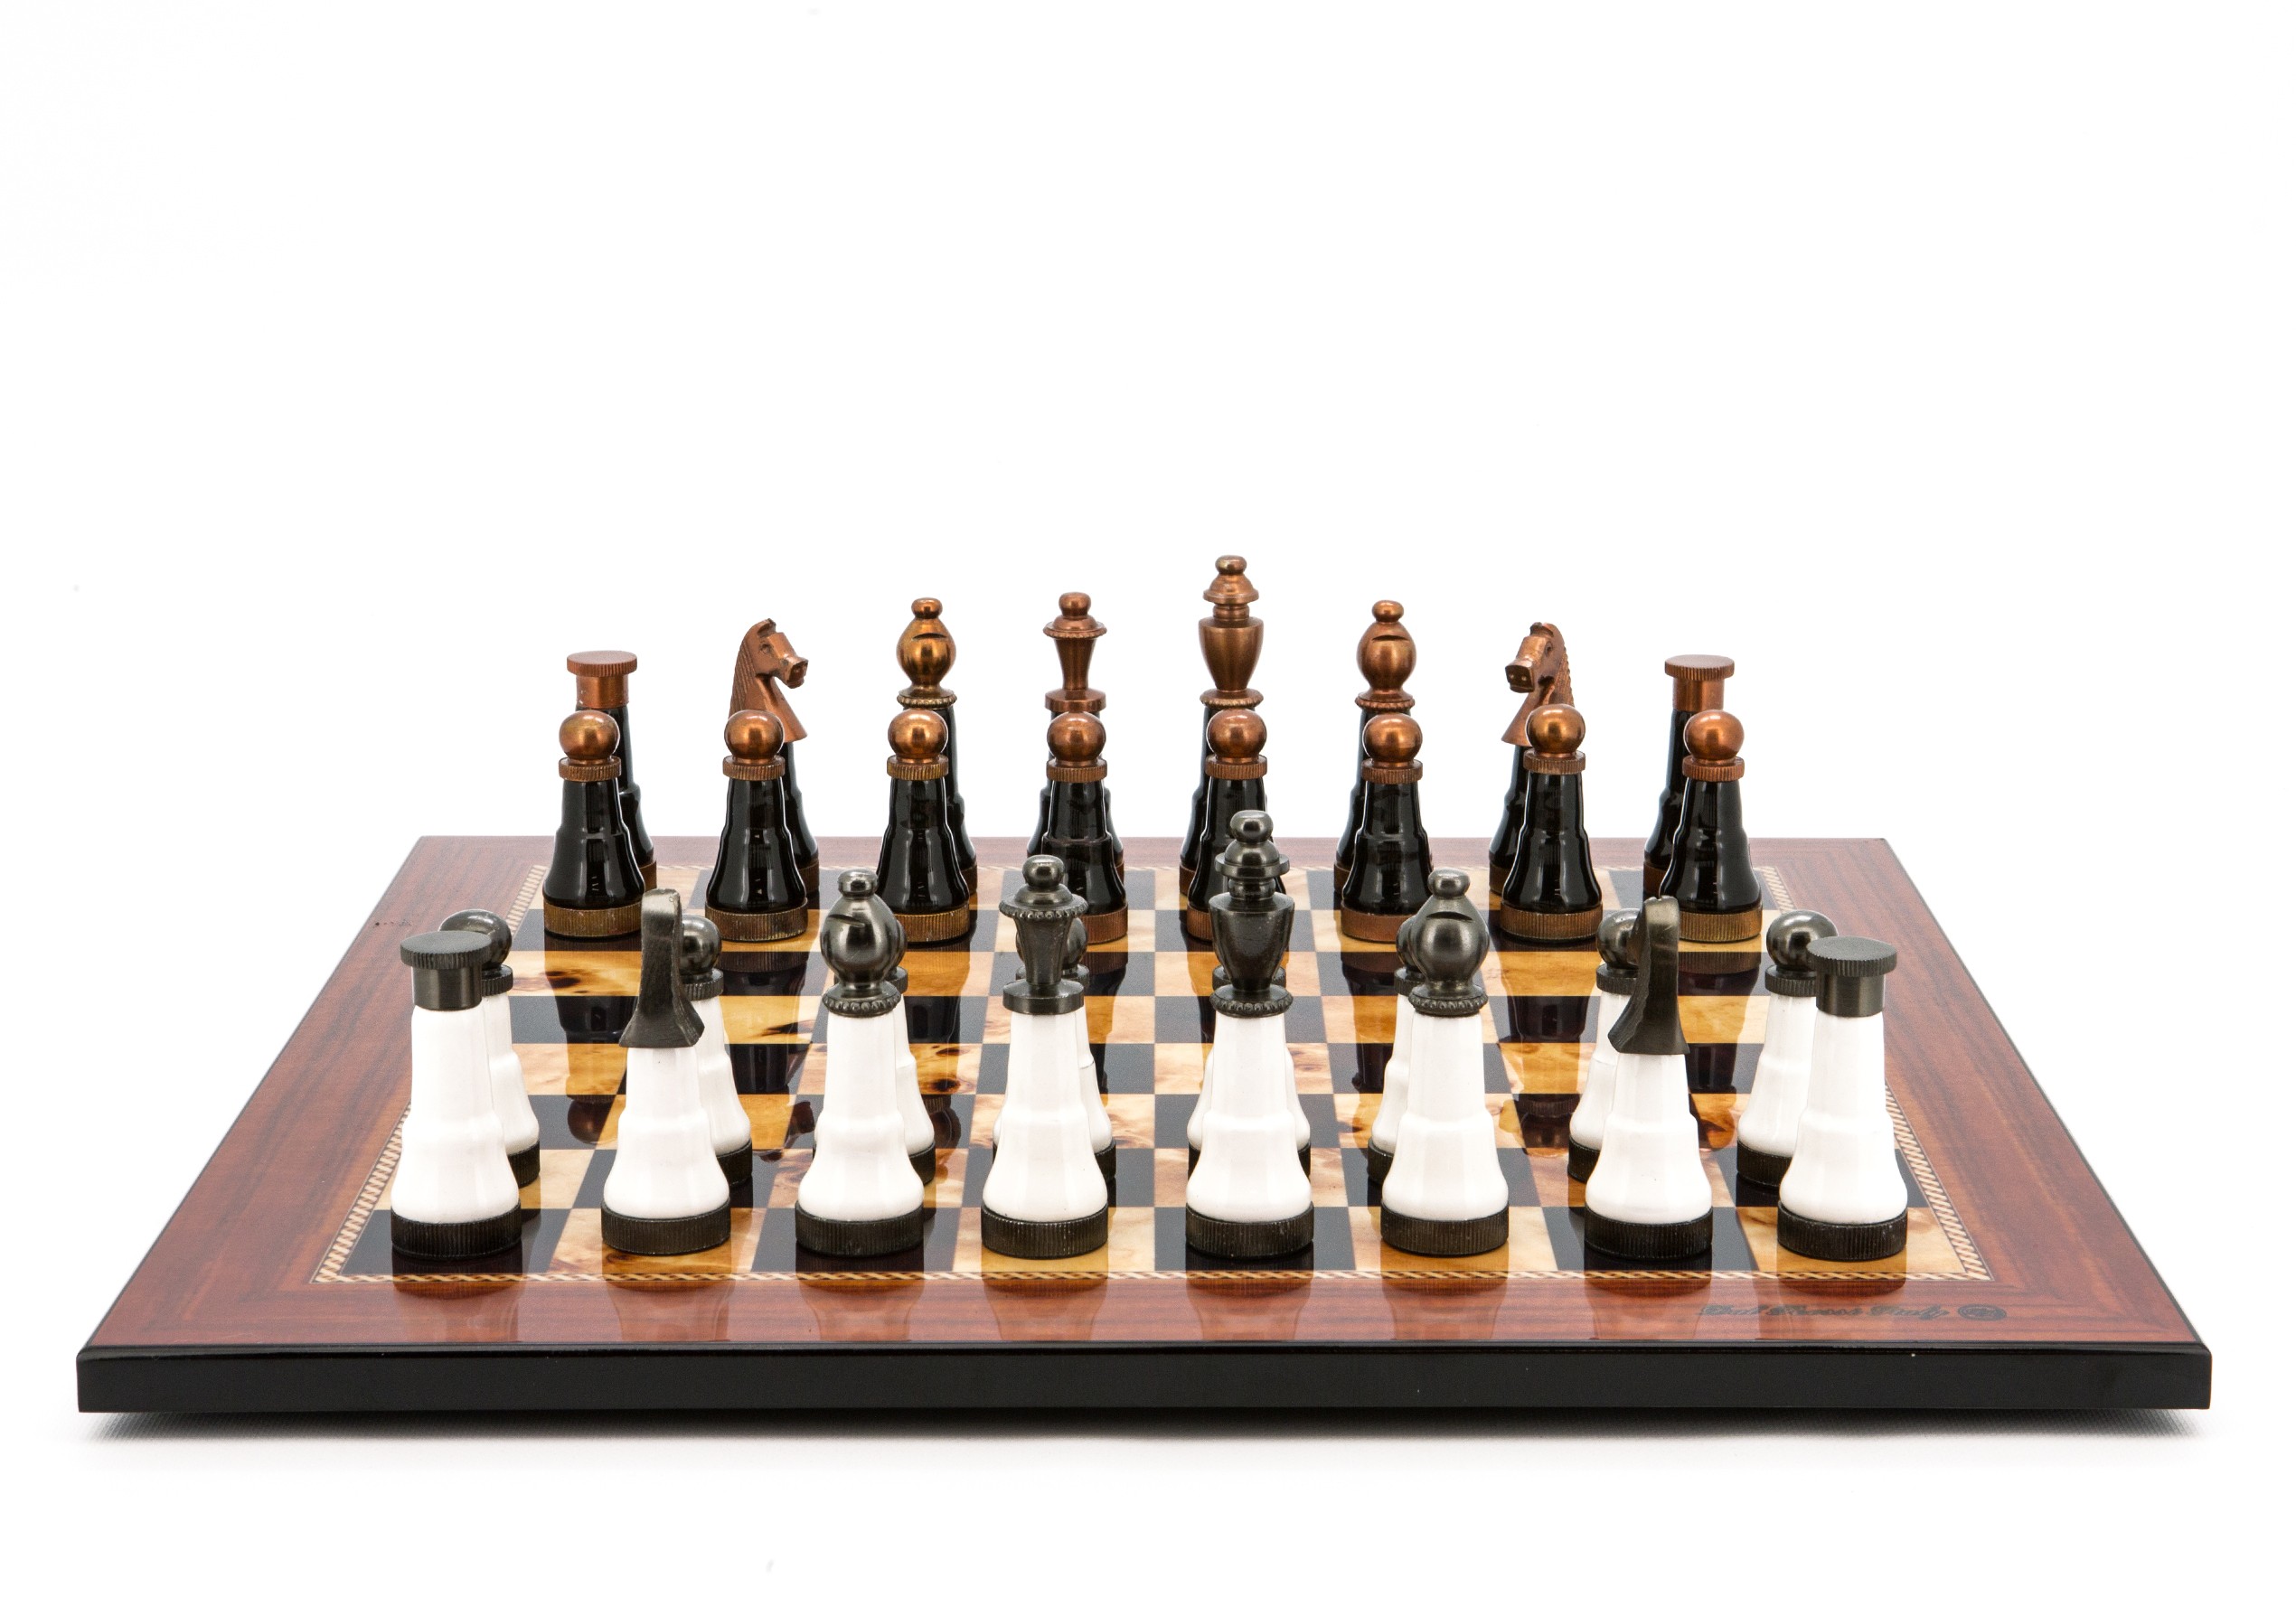 Dal Rossi Italy Chess Set Flat  Walnut Finish 50cm, With Black and White with Copper and Gun Metal Gray Tops and Bottoms Chess Pieces 110mm 